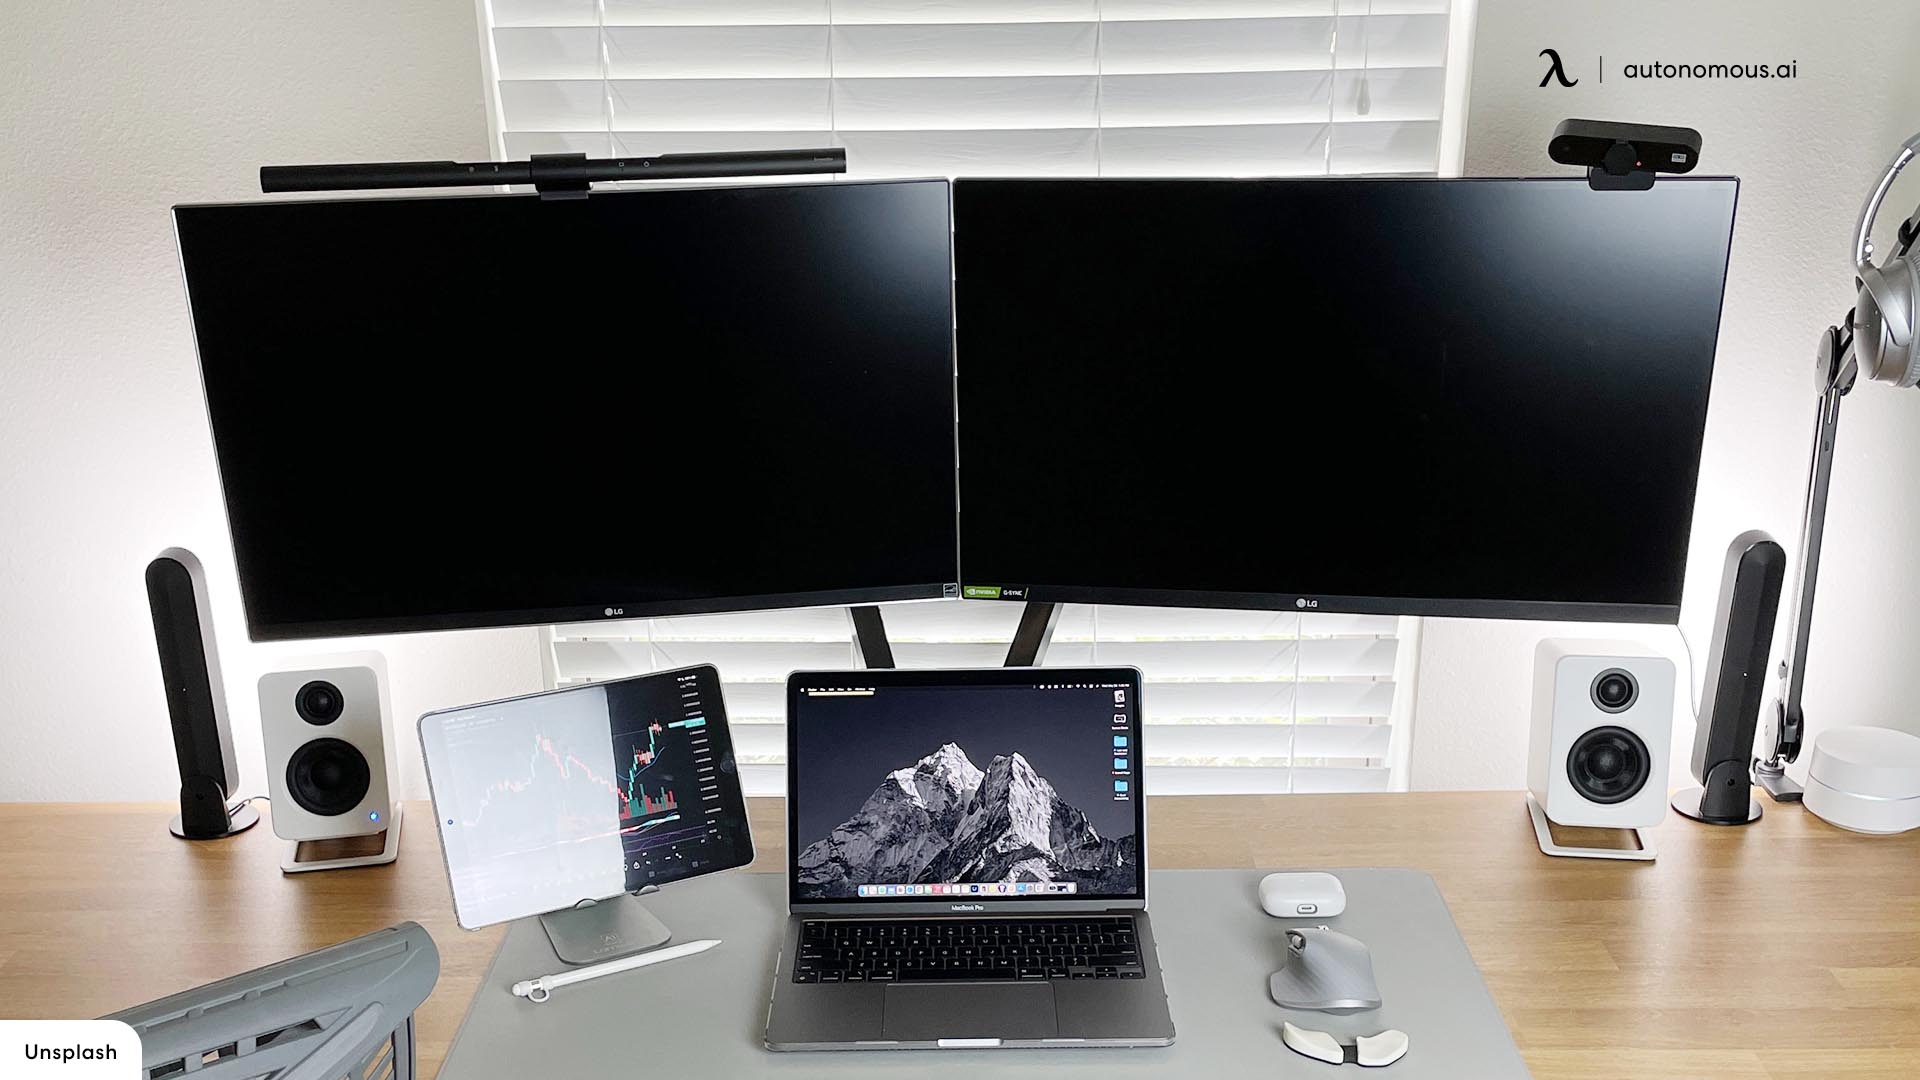 Single Vs Dual Monitor Arm: Which One is Right for You?